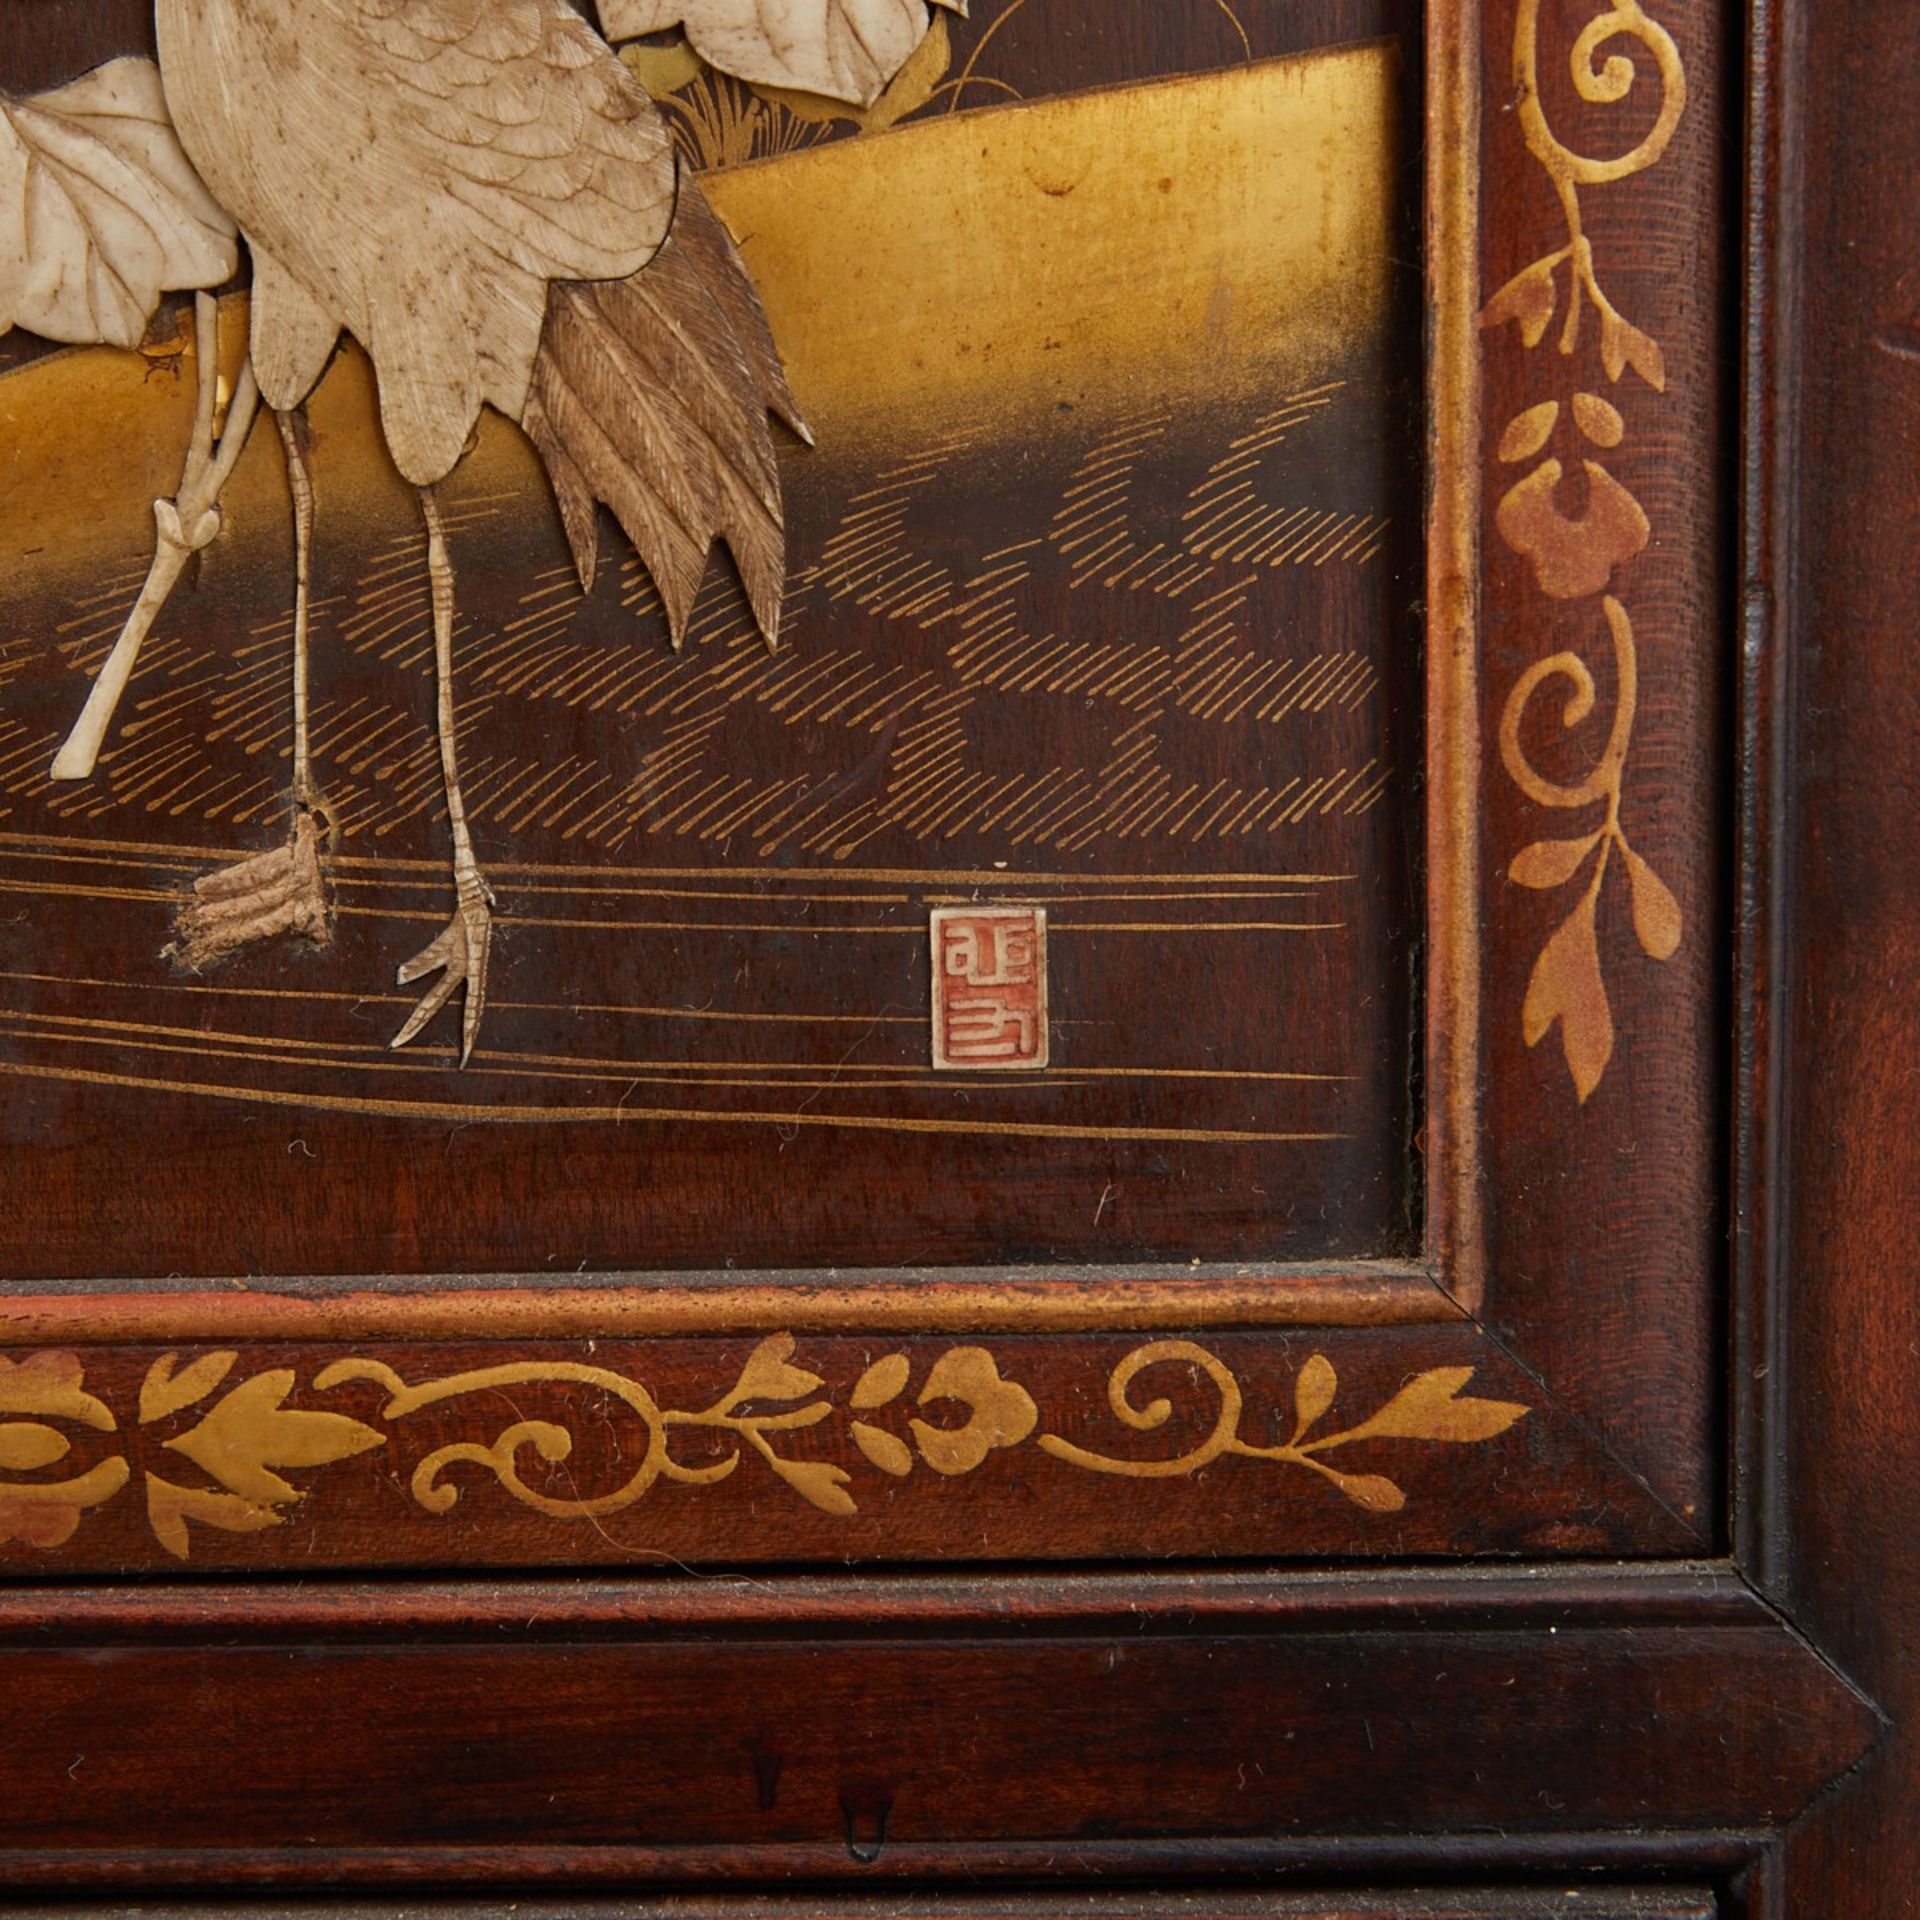 Japanese Lacquer Cabinet w/ Inlaid Decoration - Image 9 of 11